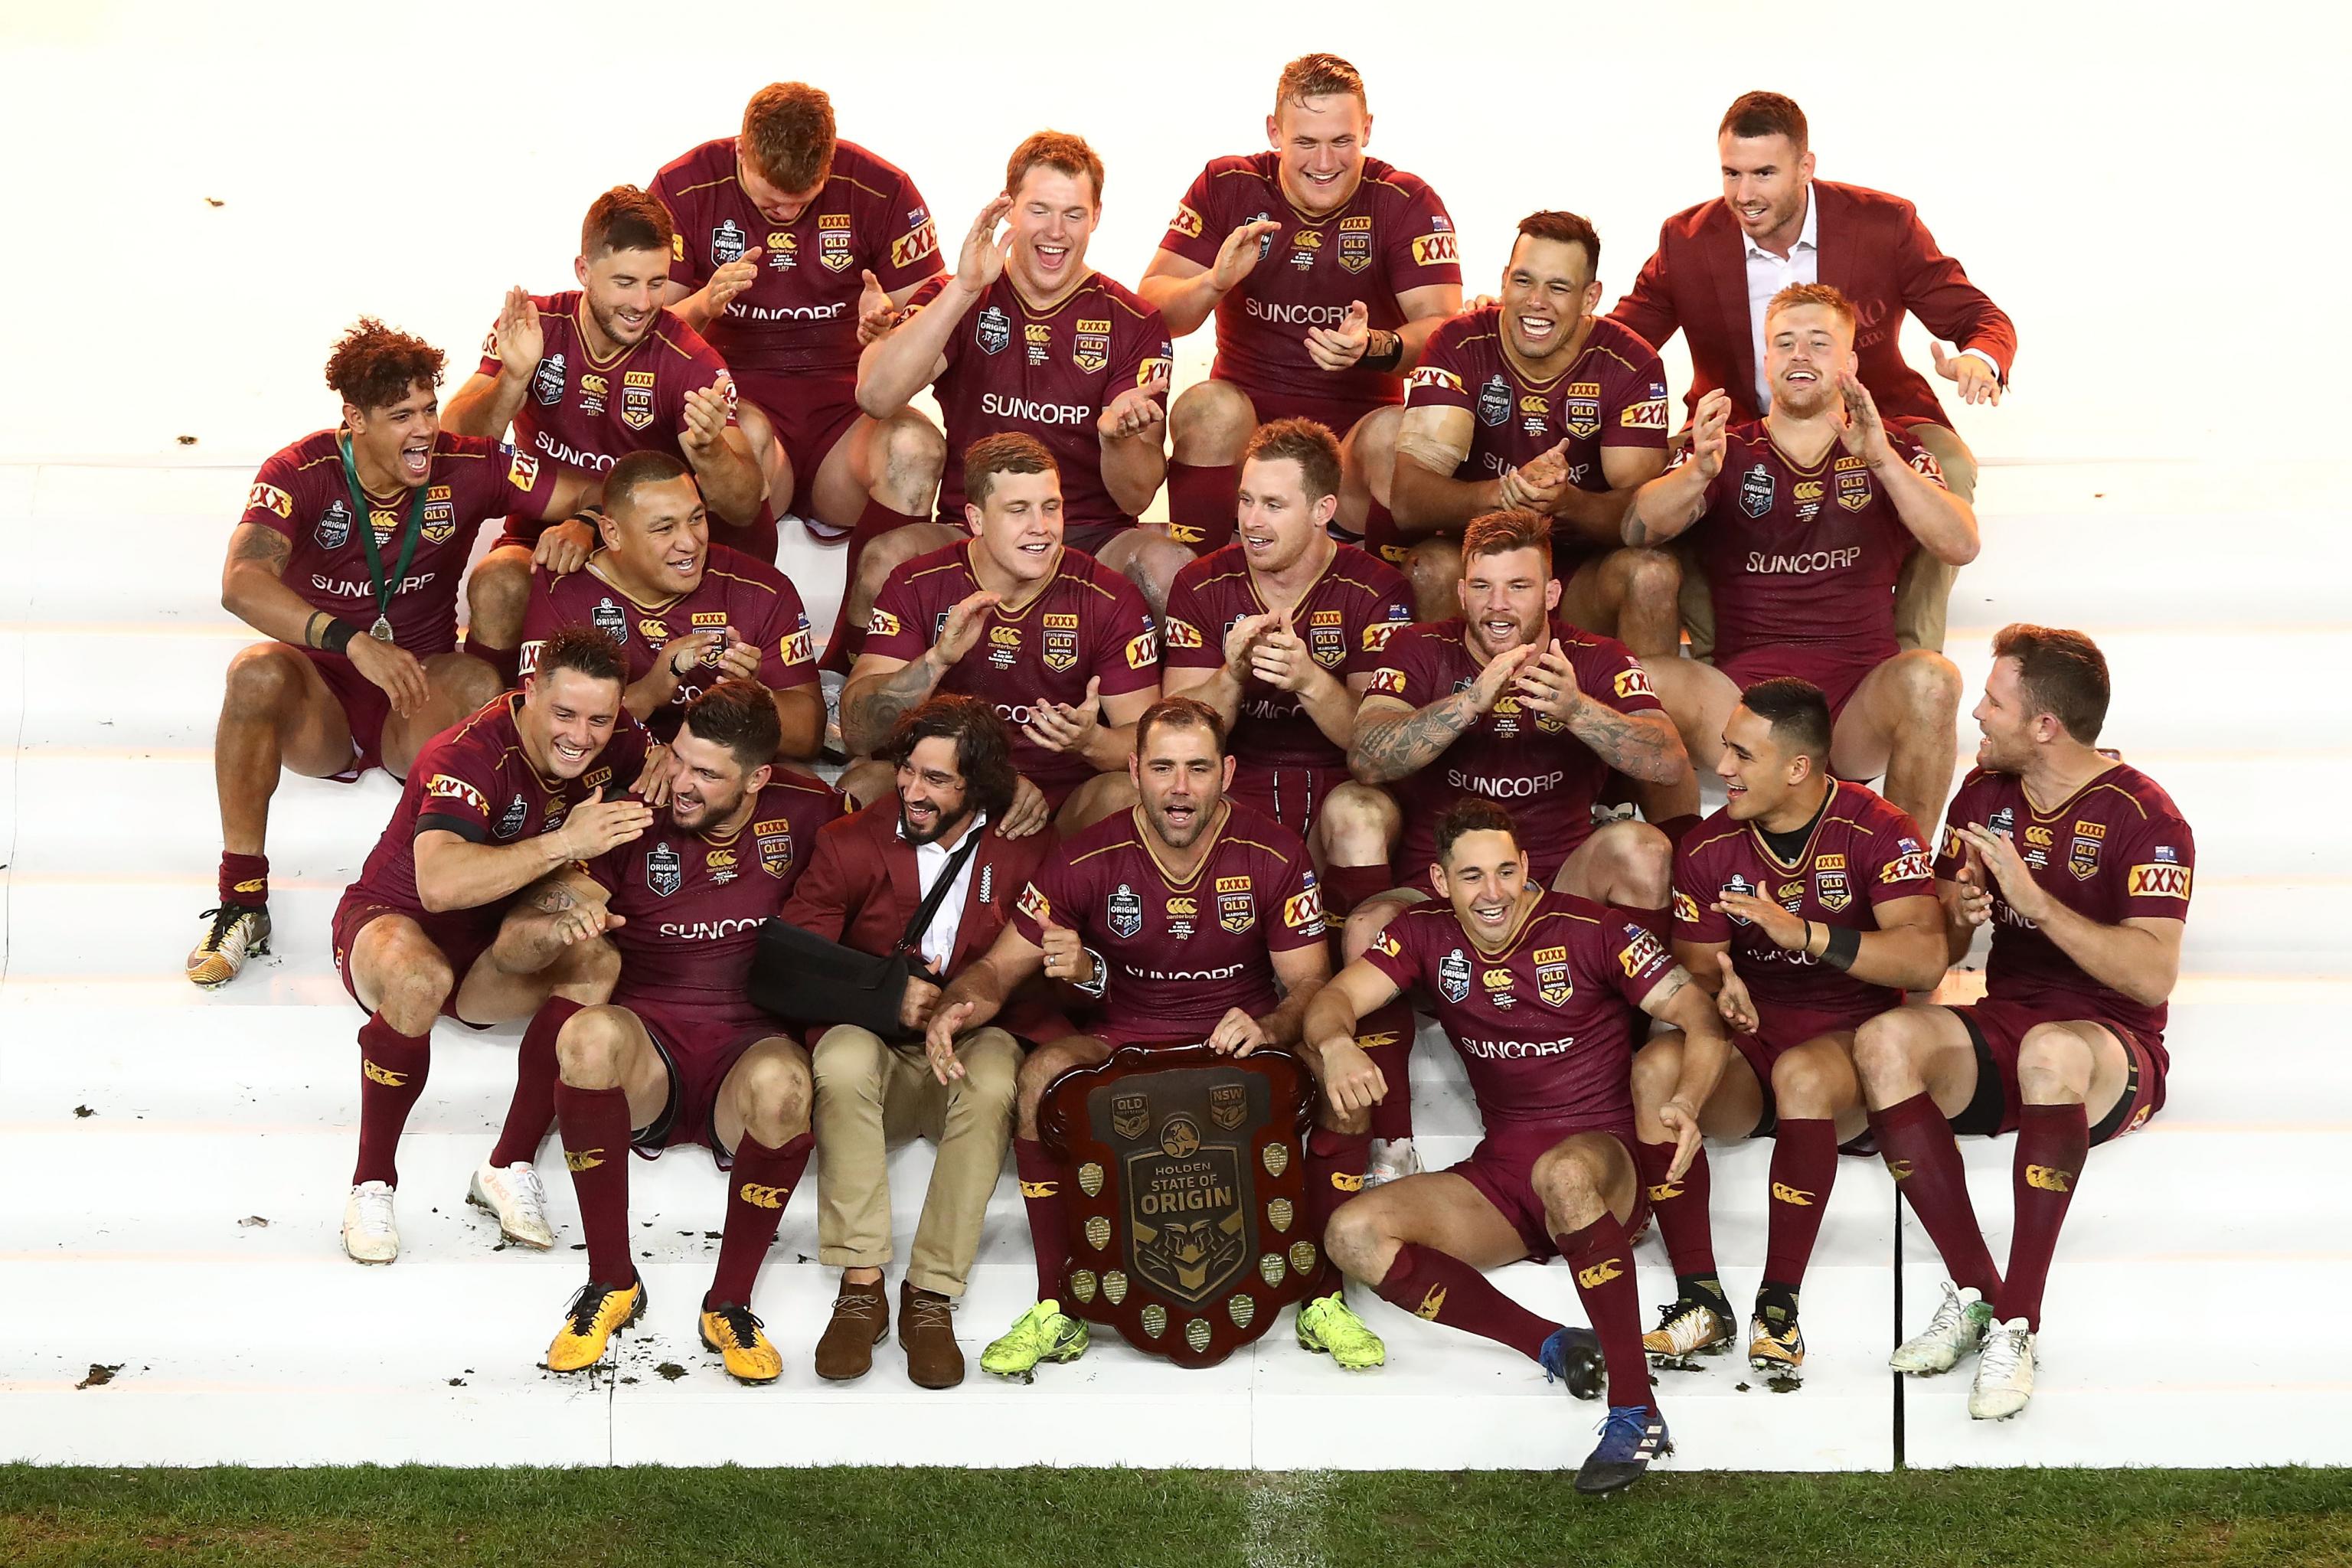 State Of Origin 2018 Date Start Time Live Stream For Blues Vs Maroons Game 1 Bleacher Report Latest News Videos And Highlights